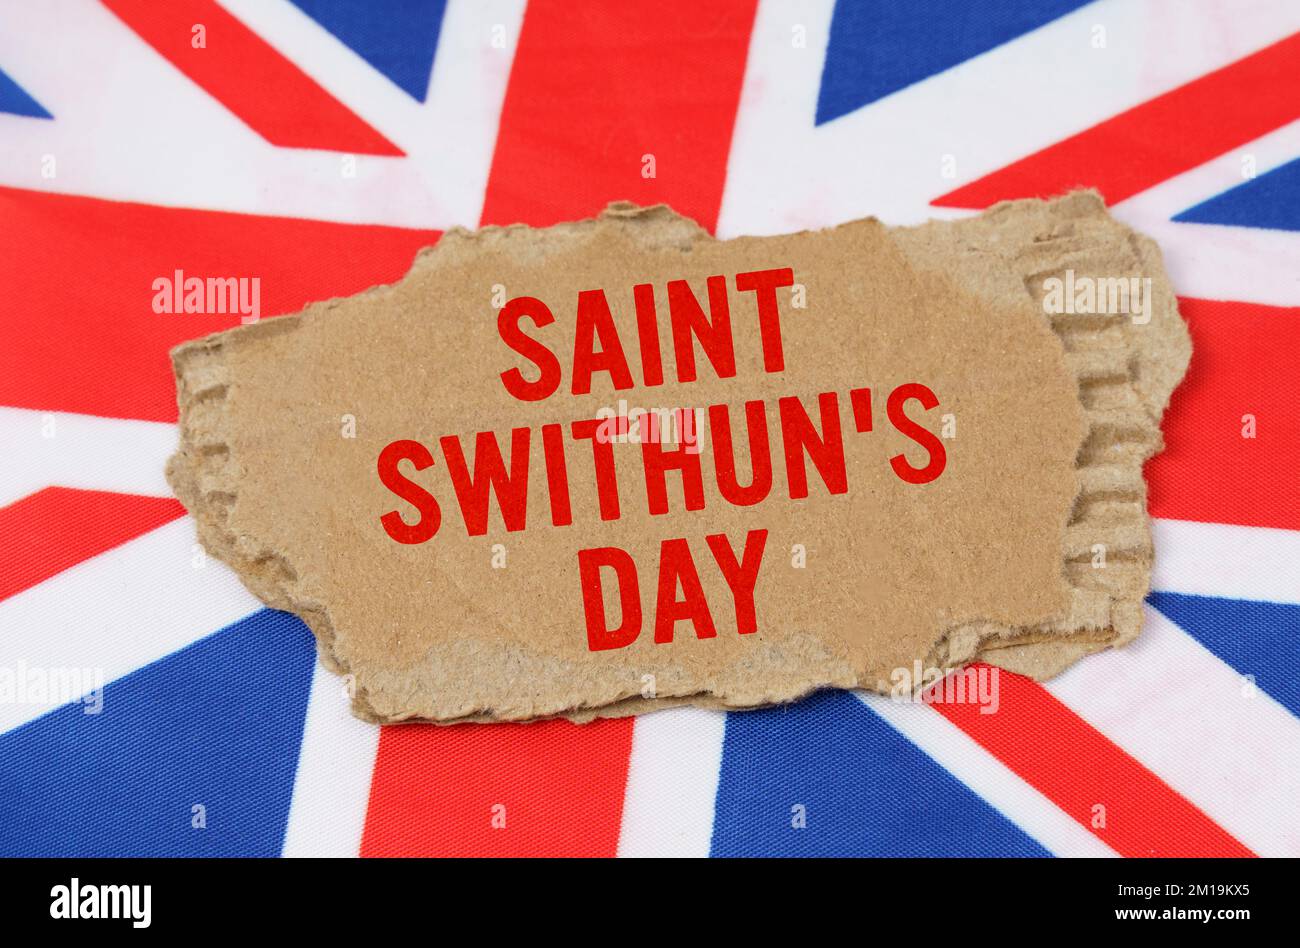 Holidays of the UK. Against the background of the flag of Great Britain lies cardboard with the inscription - Saint Swithuns Day Stock Photo